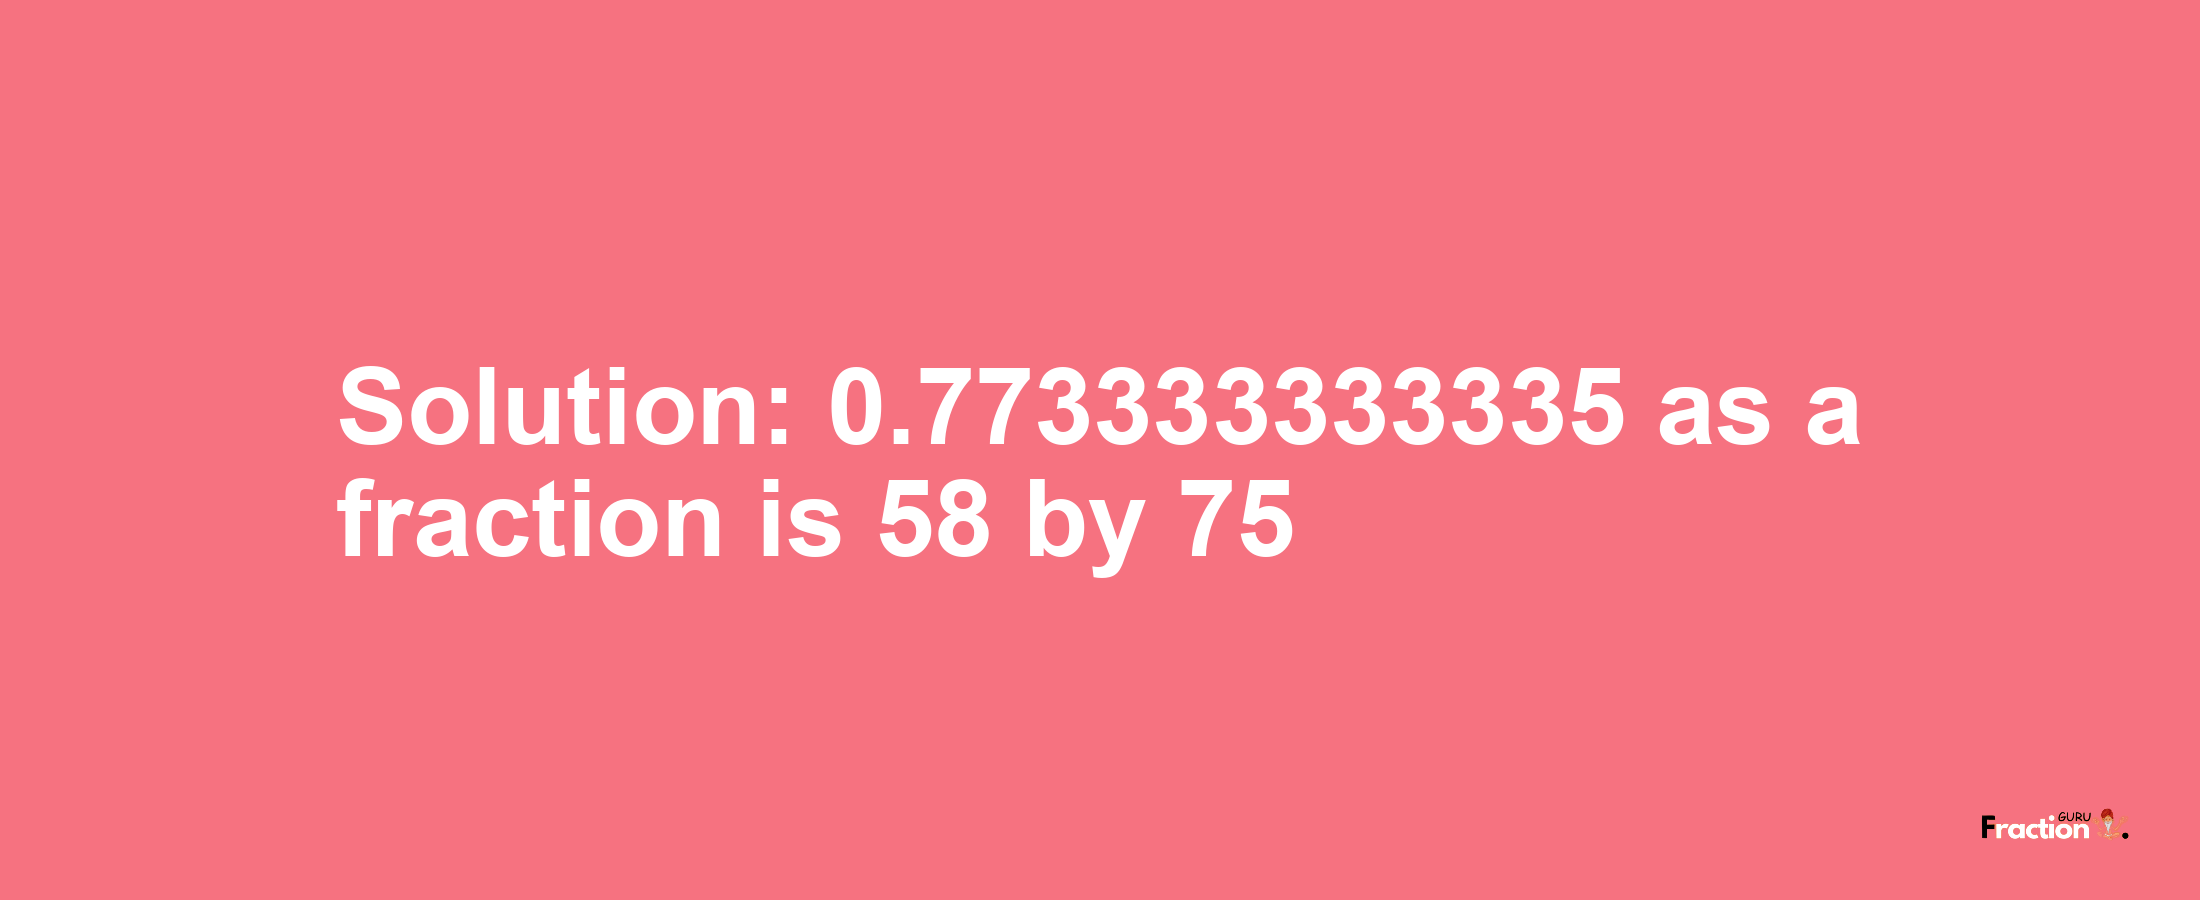 Solution:0.773333333335 as a fraction is 58/75